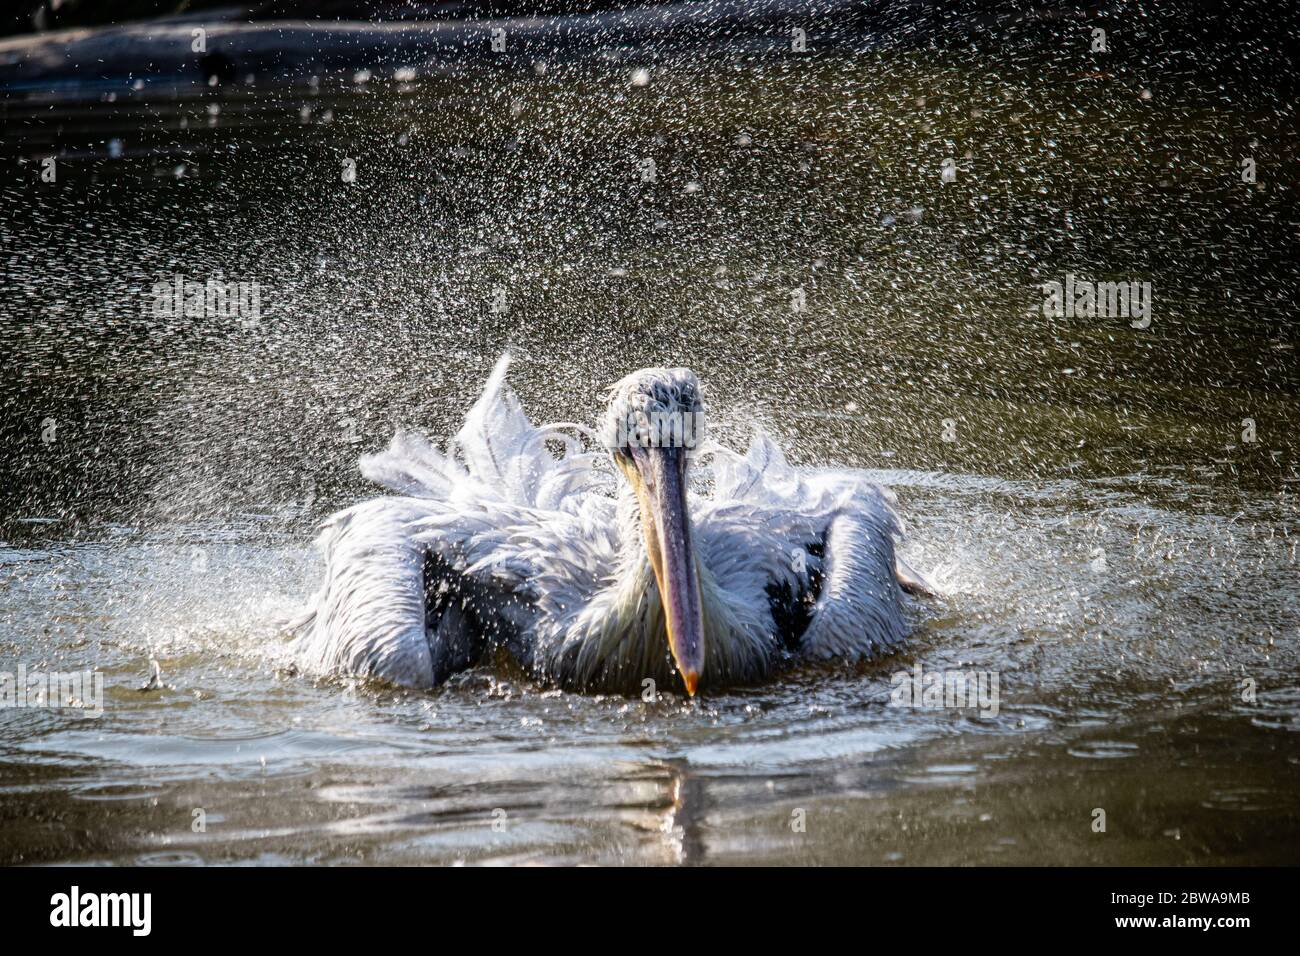 Pelican shaking water off feathers while swimming Stock Photo